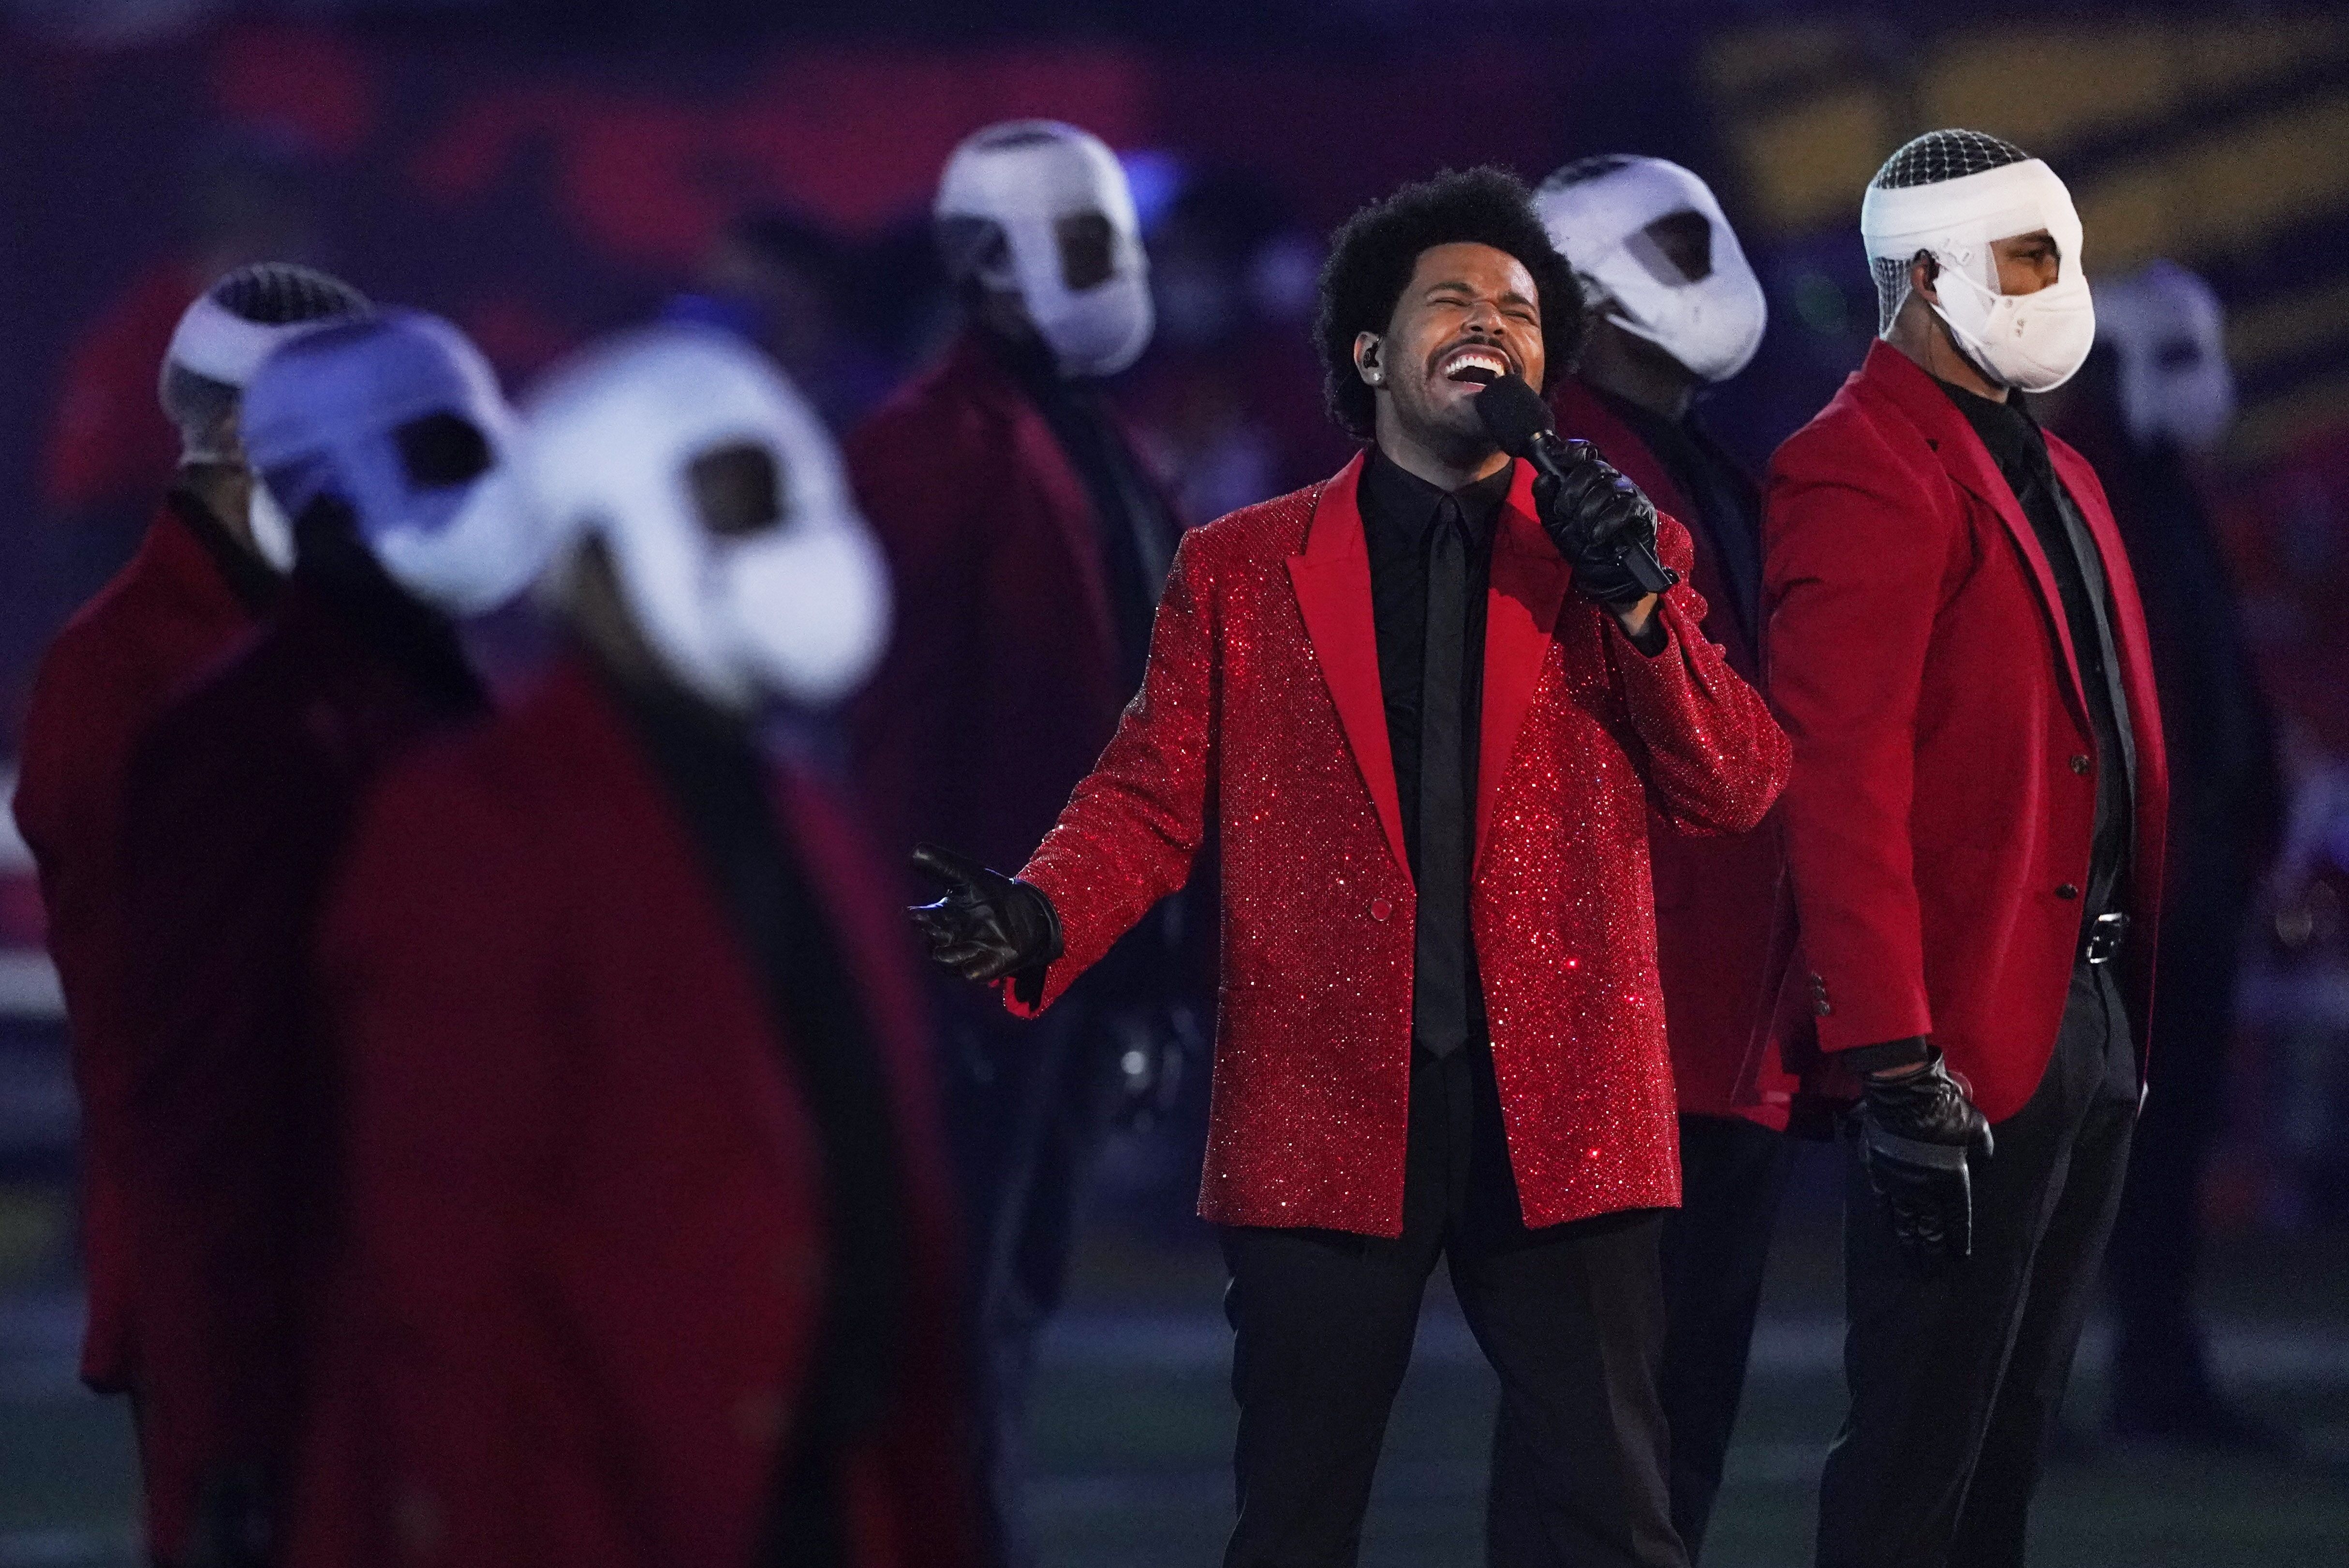 The Weeknd Lights Up the Stadium During Super Bowl 2021 Halftime Show